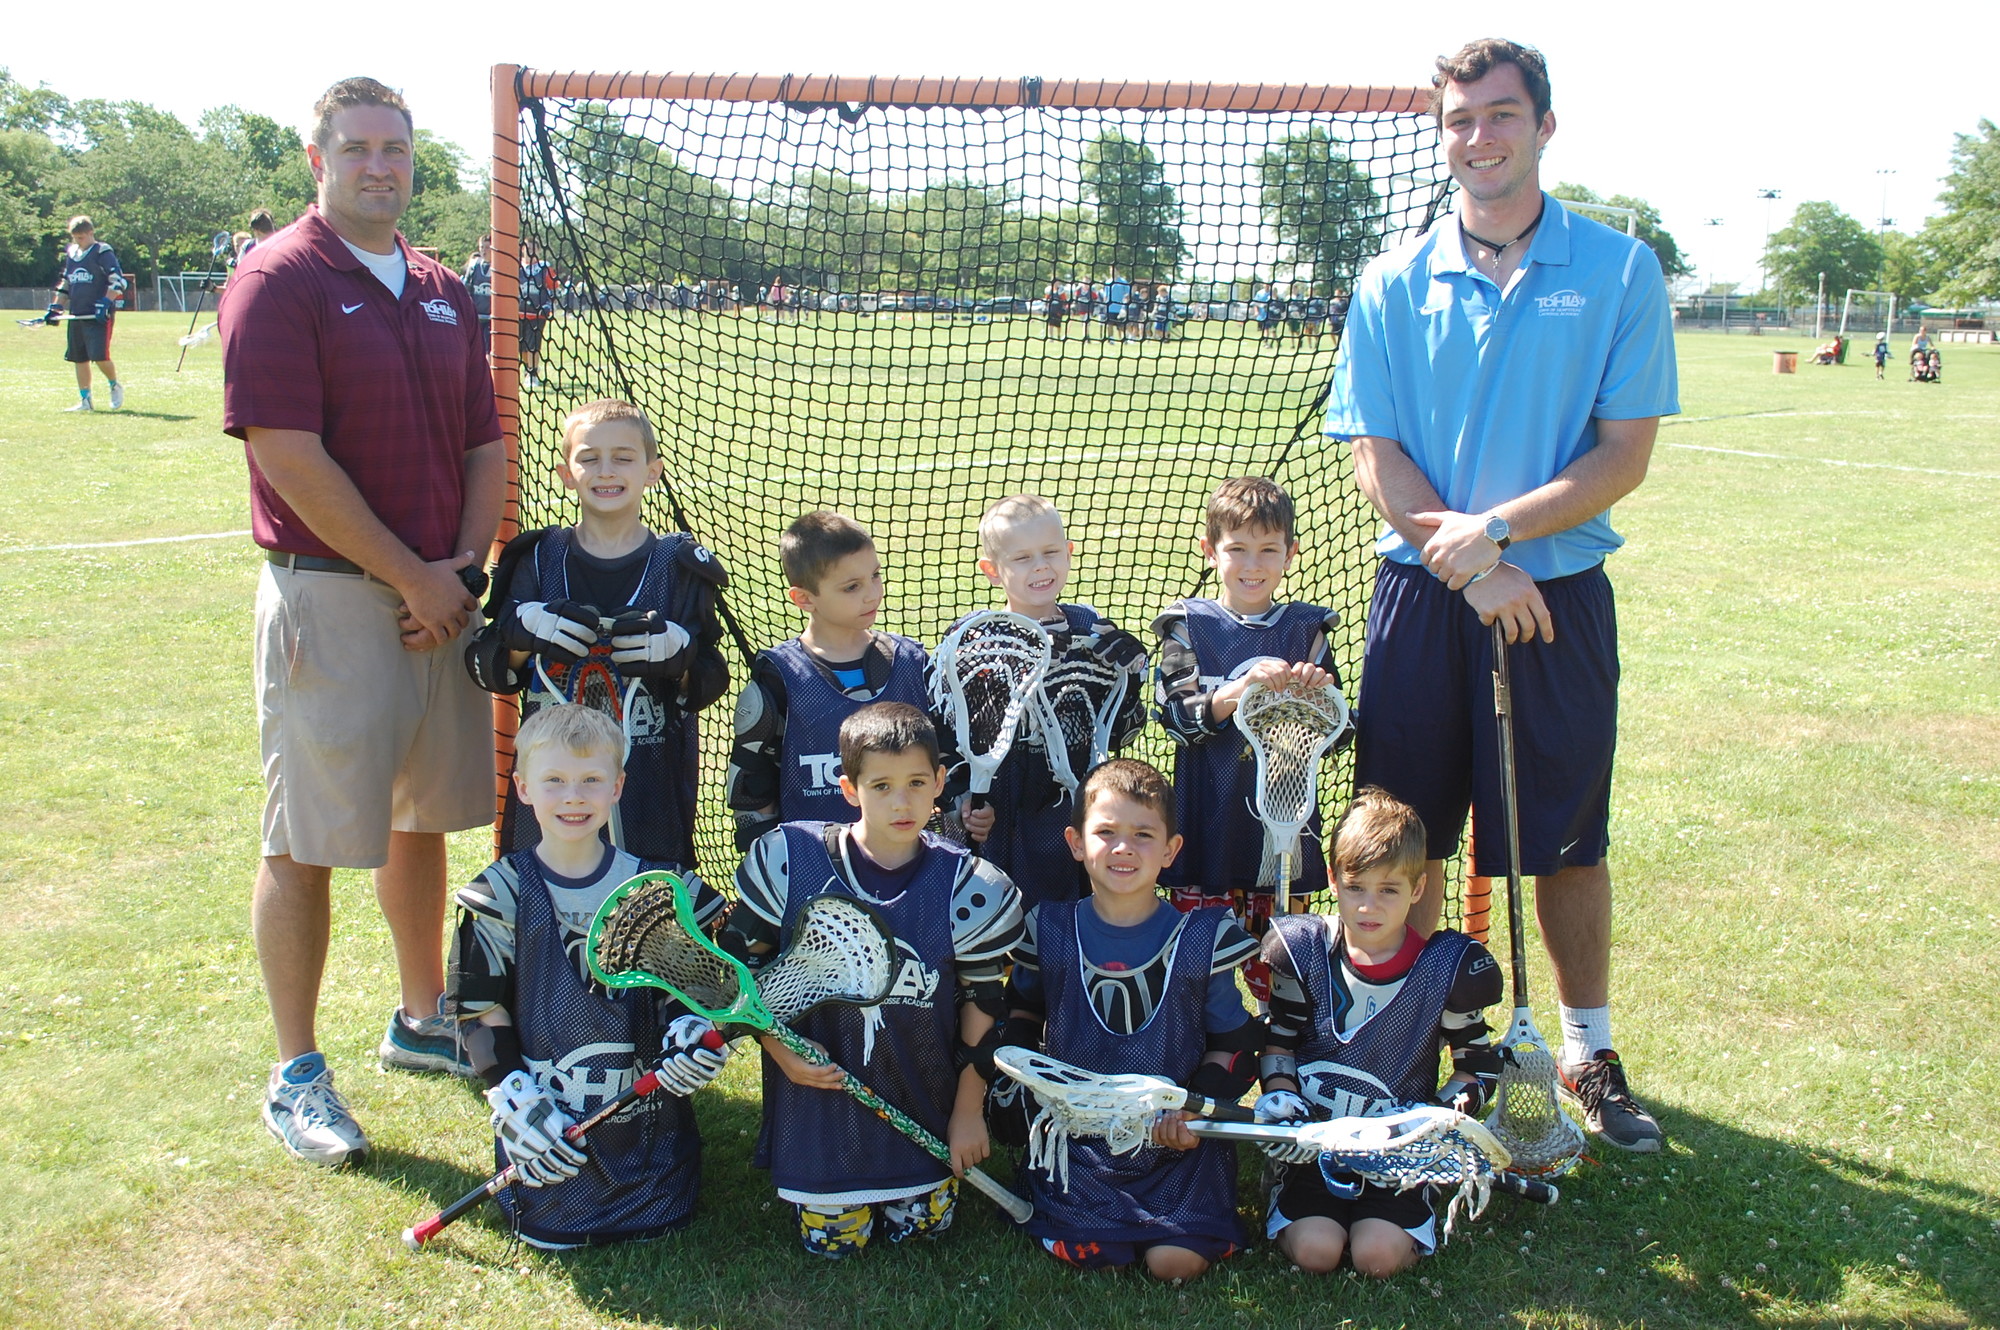 Lacrosse Academy Assistant Director Ryan Kelly, left, and coach Connor Buckley, right, with the Seaford team during last week’s clinic at Seaman’s Neck Park.